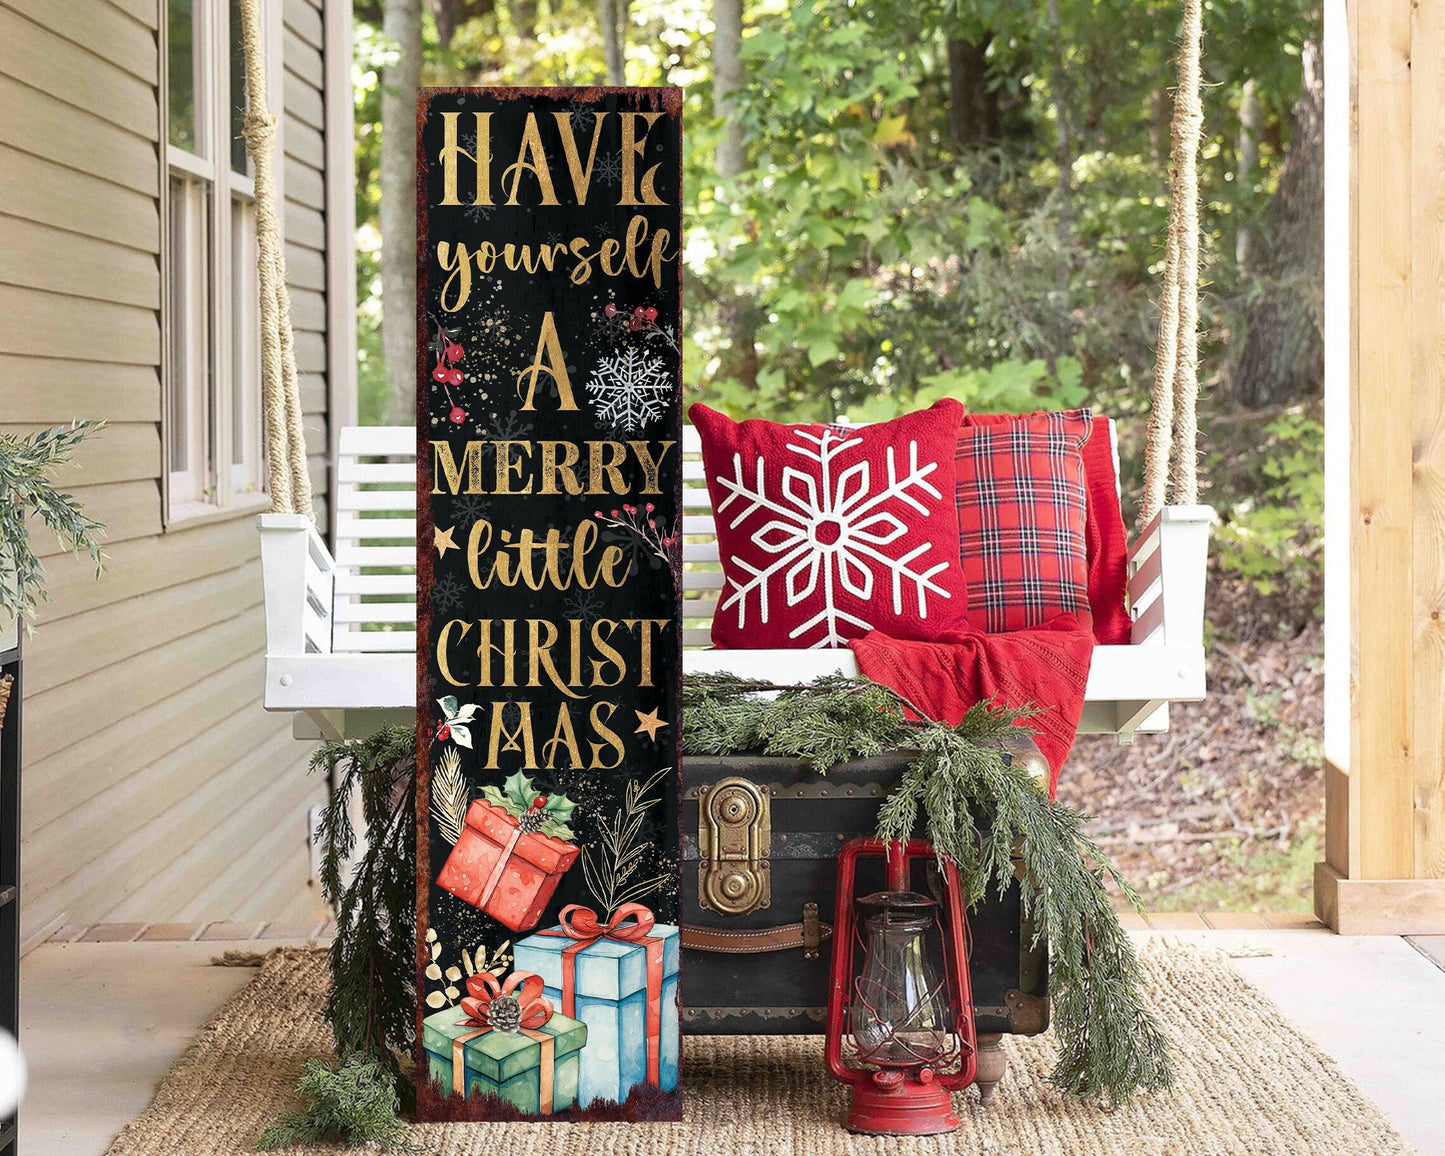 36in "Have Yourself a Merry Little Christmas" Porch Sign - Front Porch Christmas Decor Welcome Sign, Rustic Modern Farmhouse Entryway Board